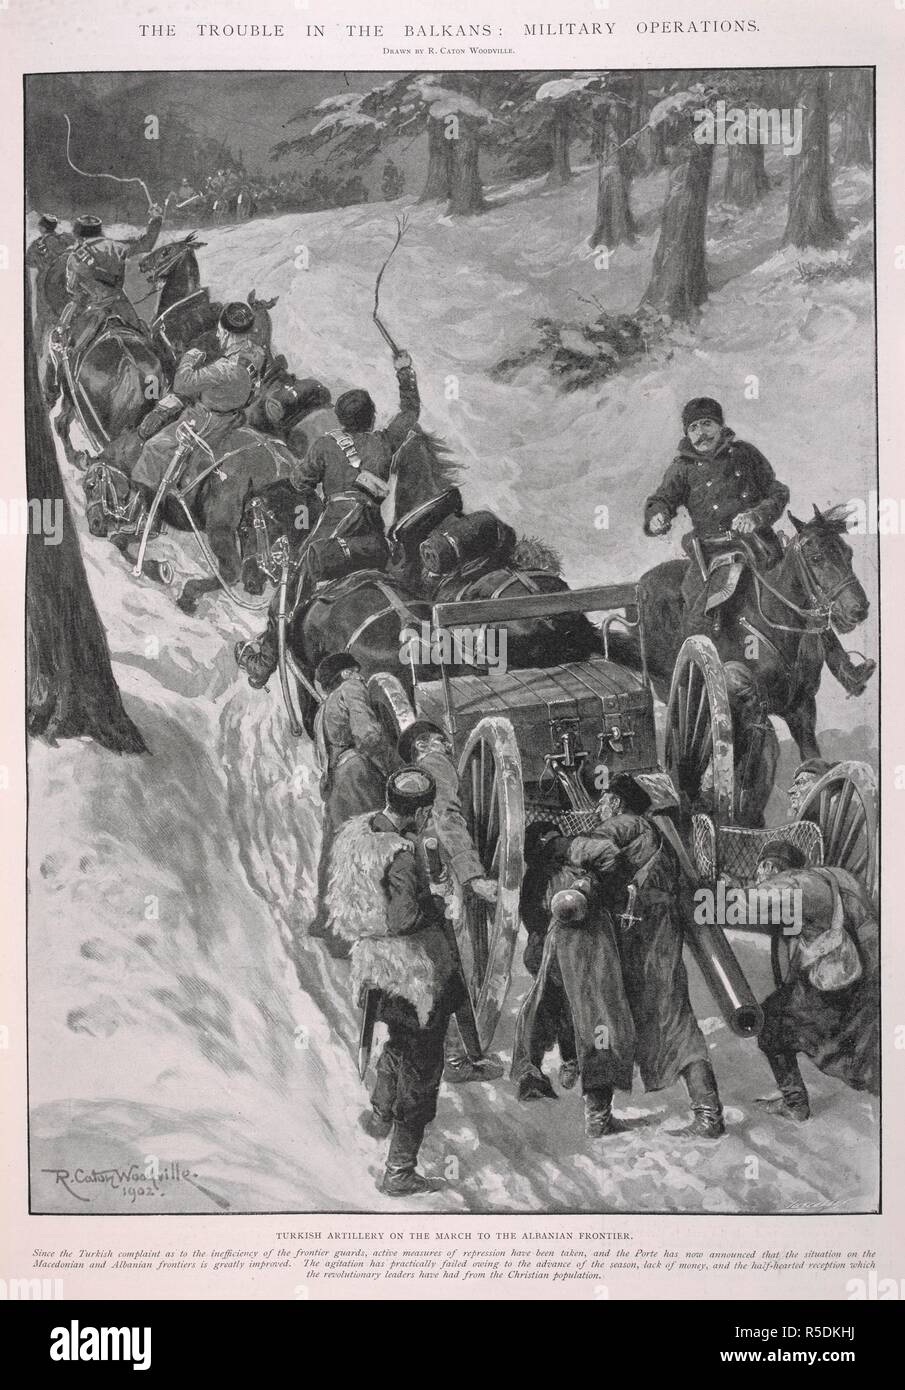 'The trouble in the Balkans: Military operations'. 'Turkish artillery on the march to the Albanian front'. The Illustrated London News. London, 1902. Source: The Illustrated London News, 15 November 1902, page 747. Author: Caton Woodville, R. Stock Photo